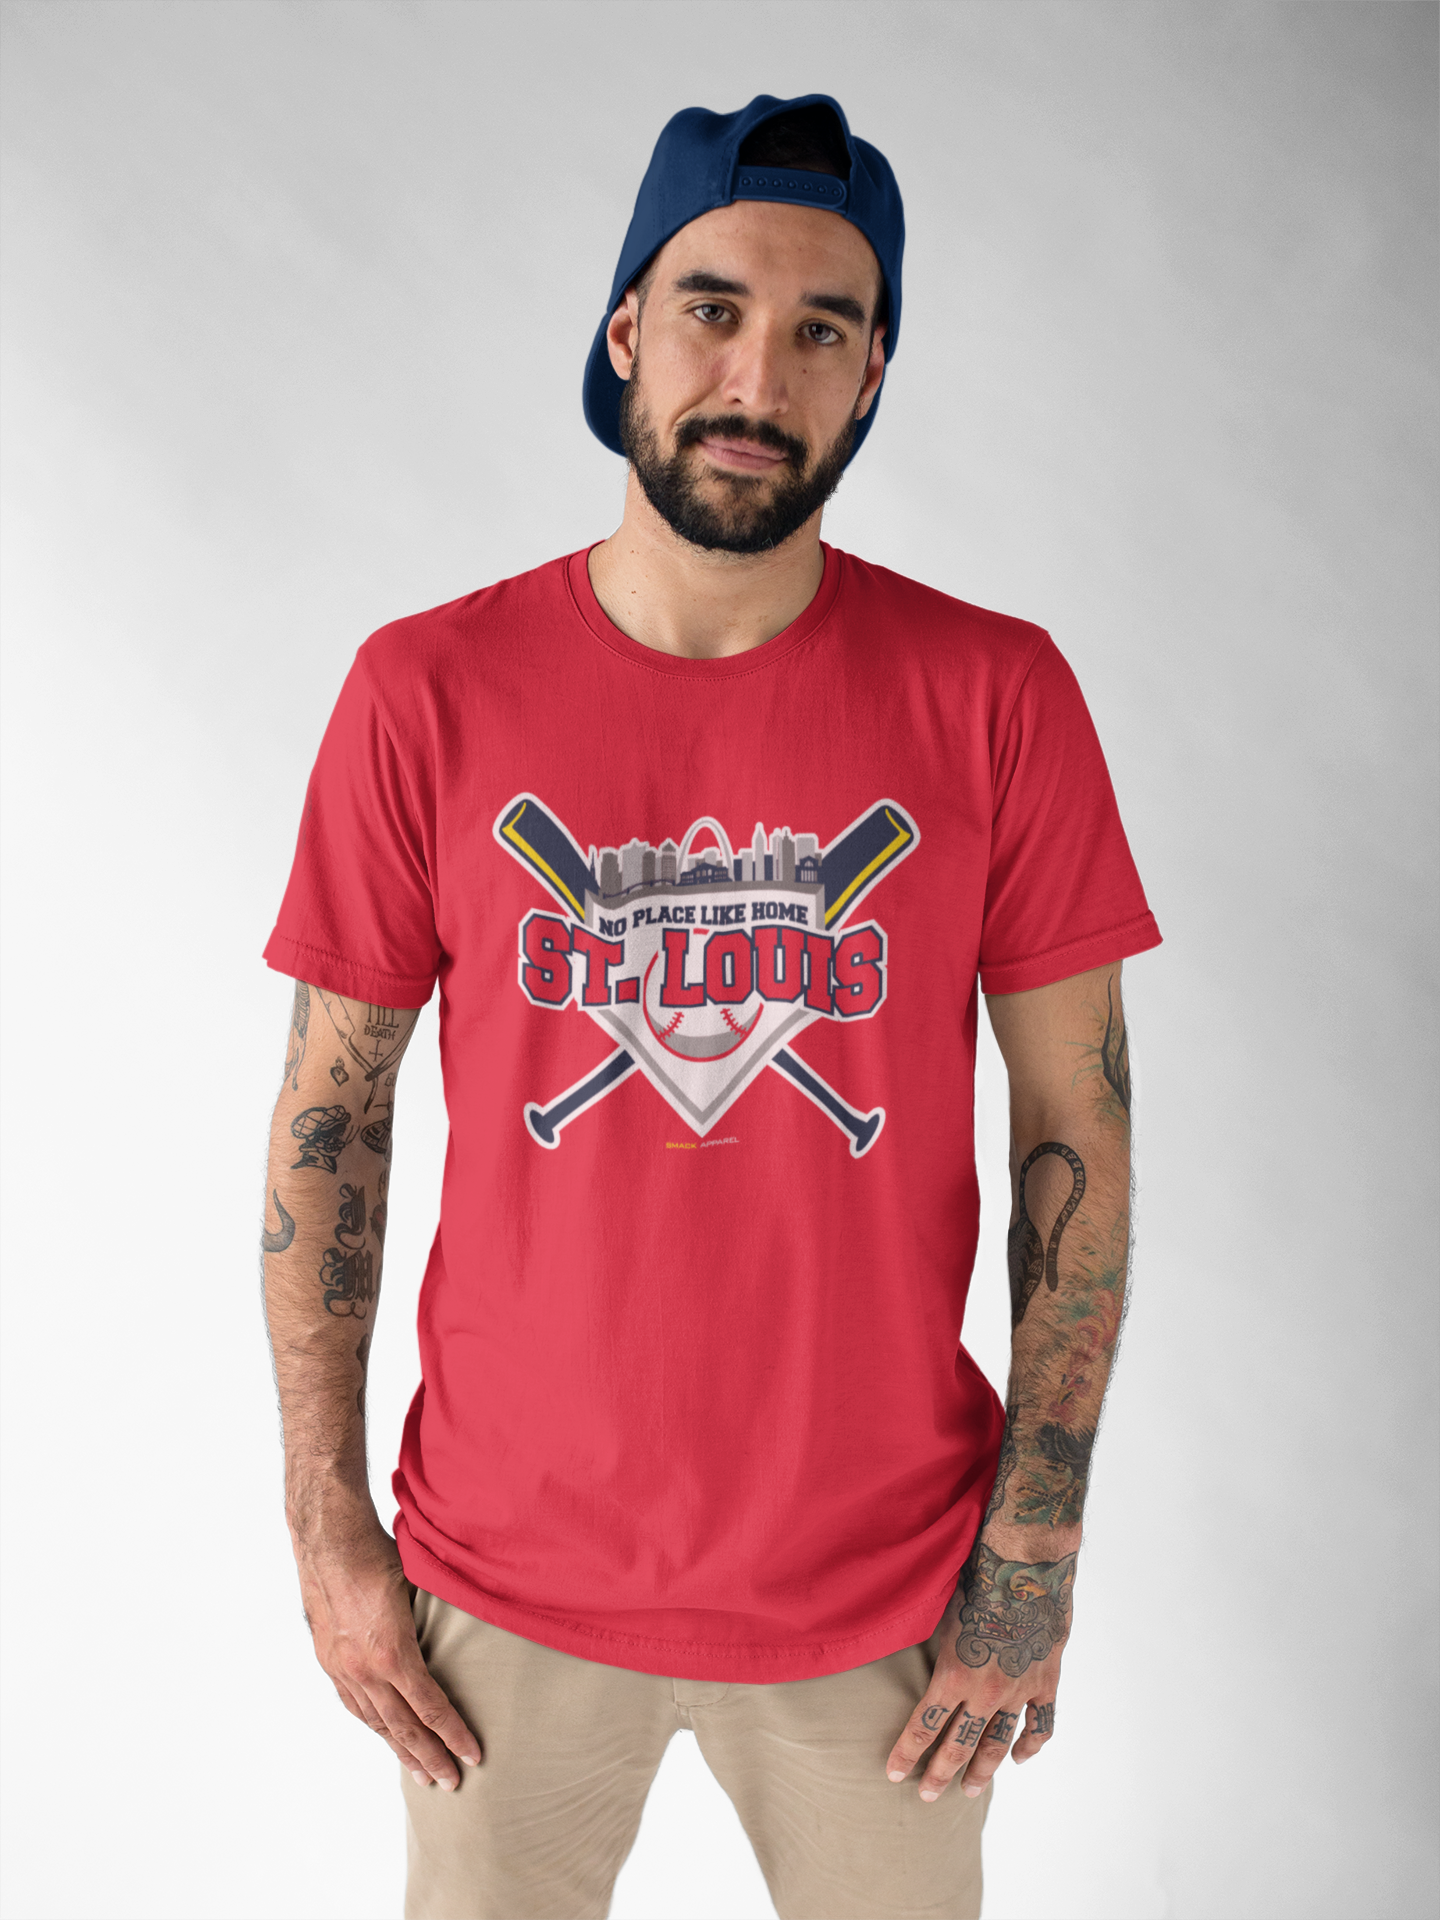 Smack Apparel No Place Like Home T-Shirt for St. Louis Baseball Fans Short Sleeve / 5XL / Red